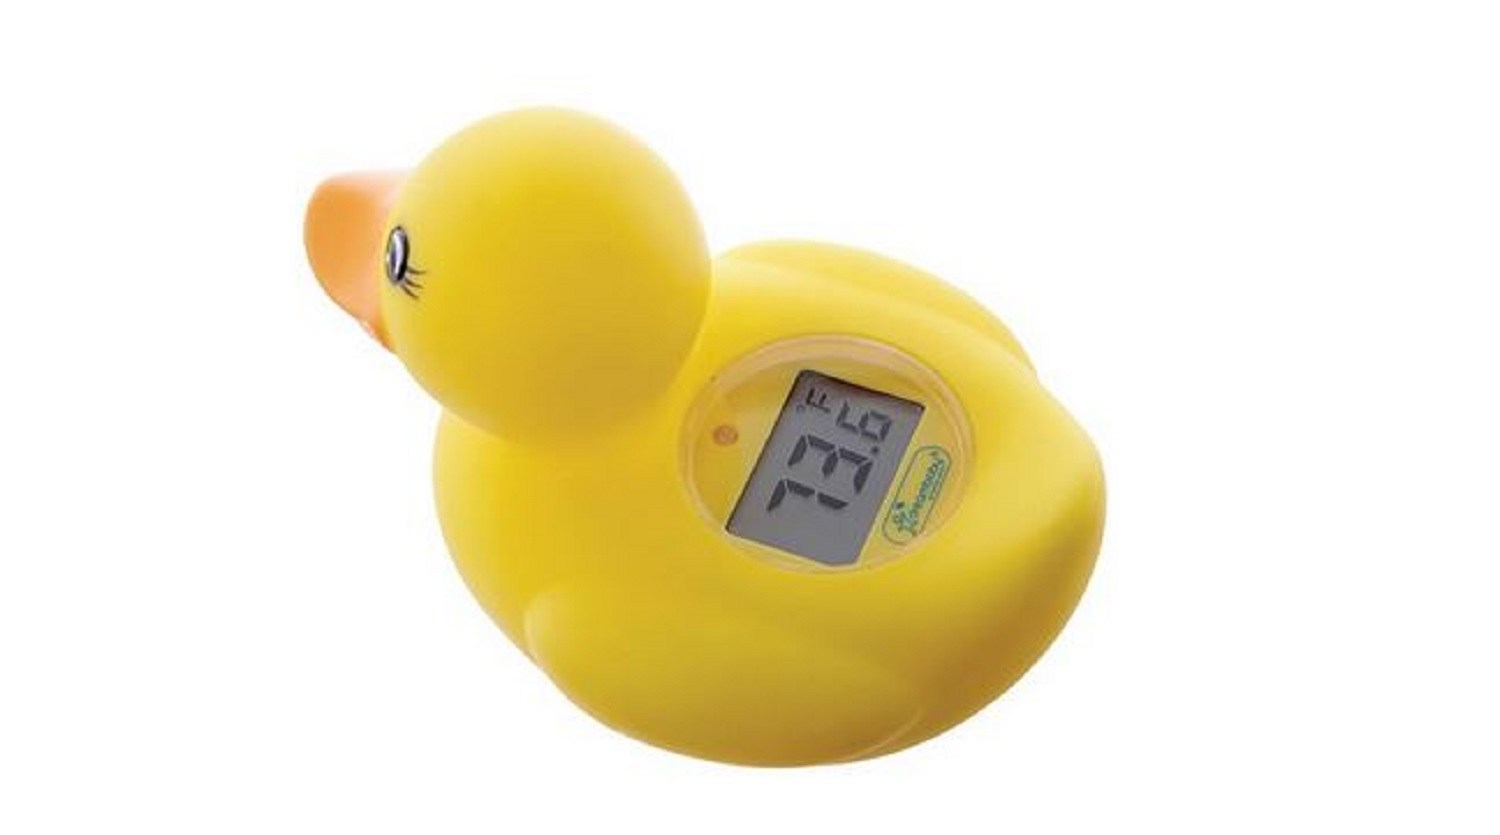 A6 Nursery and Childrens Owl Baby Room Thermometers